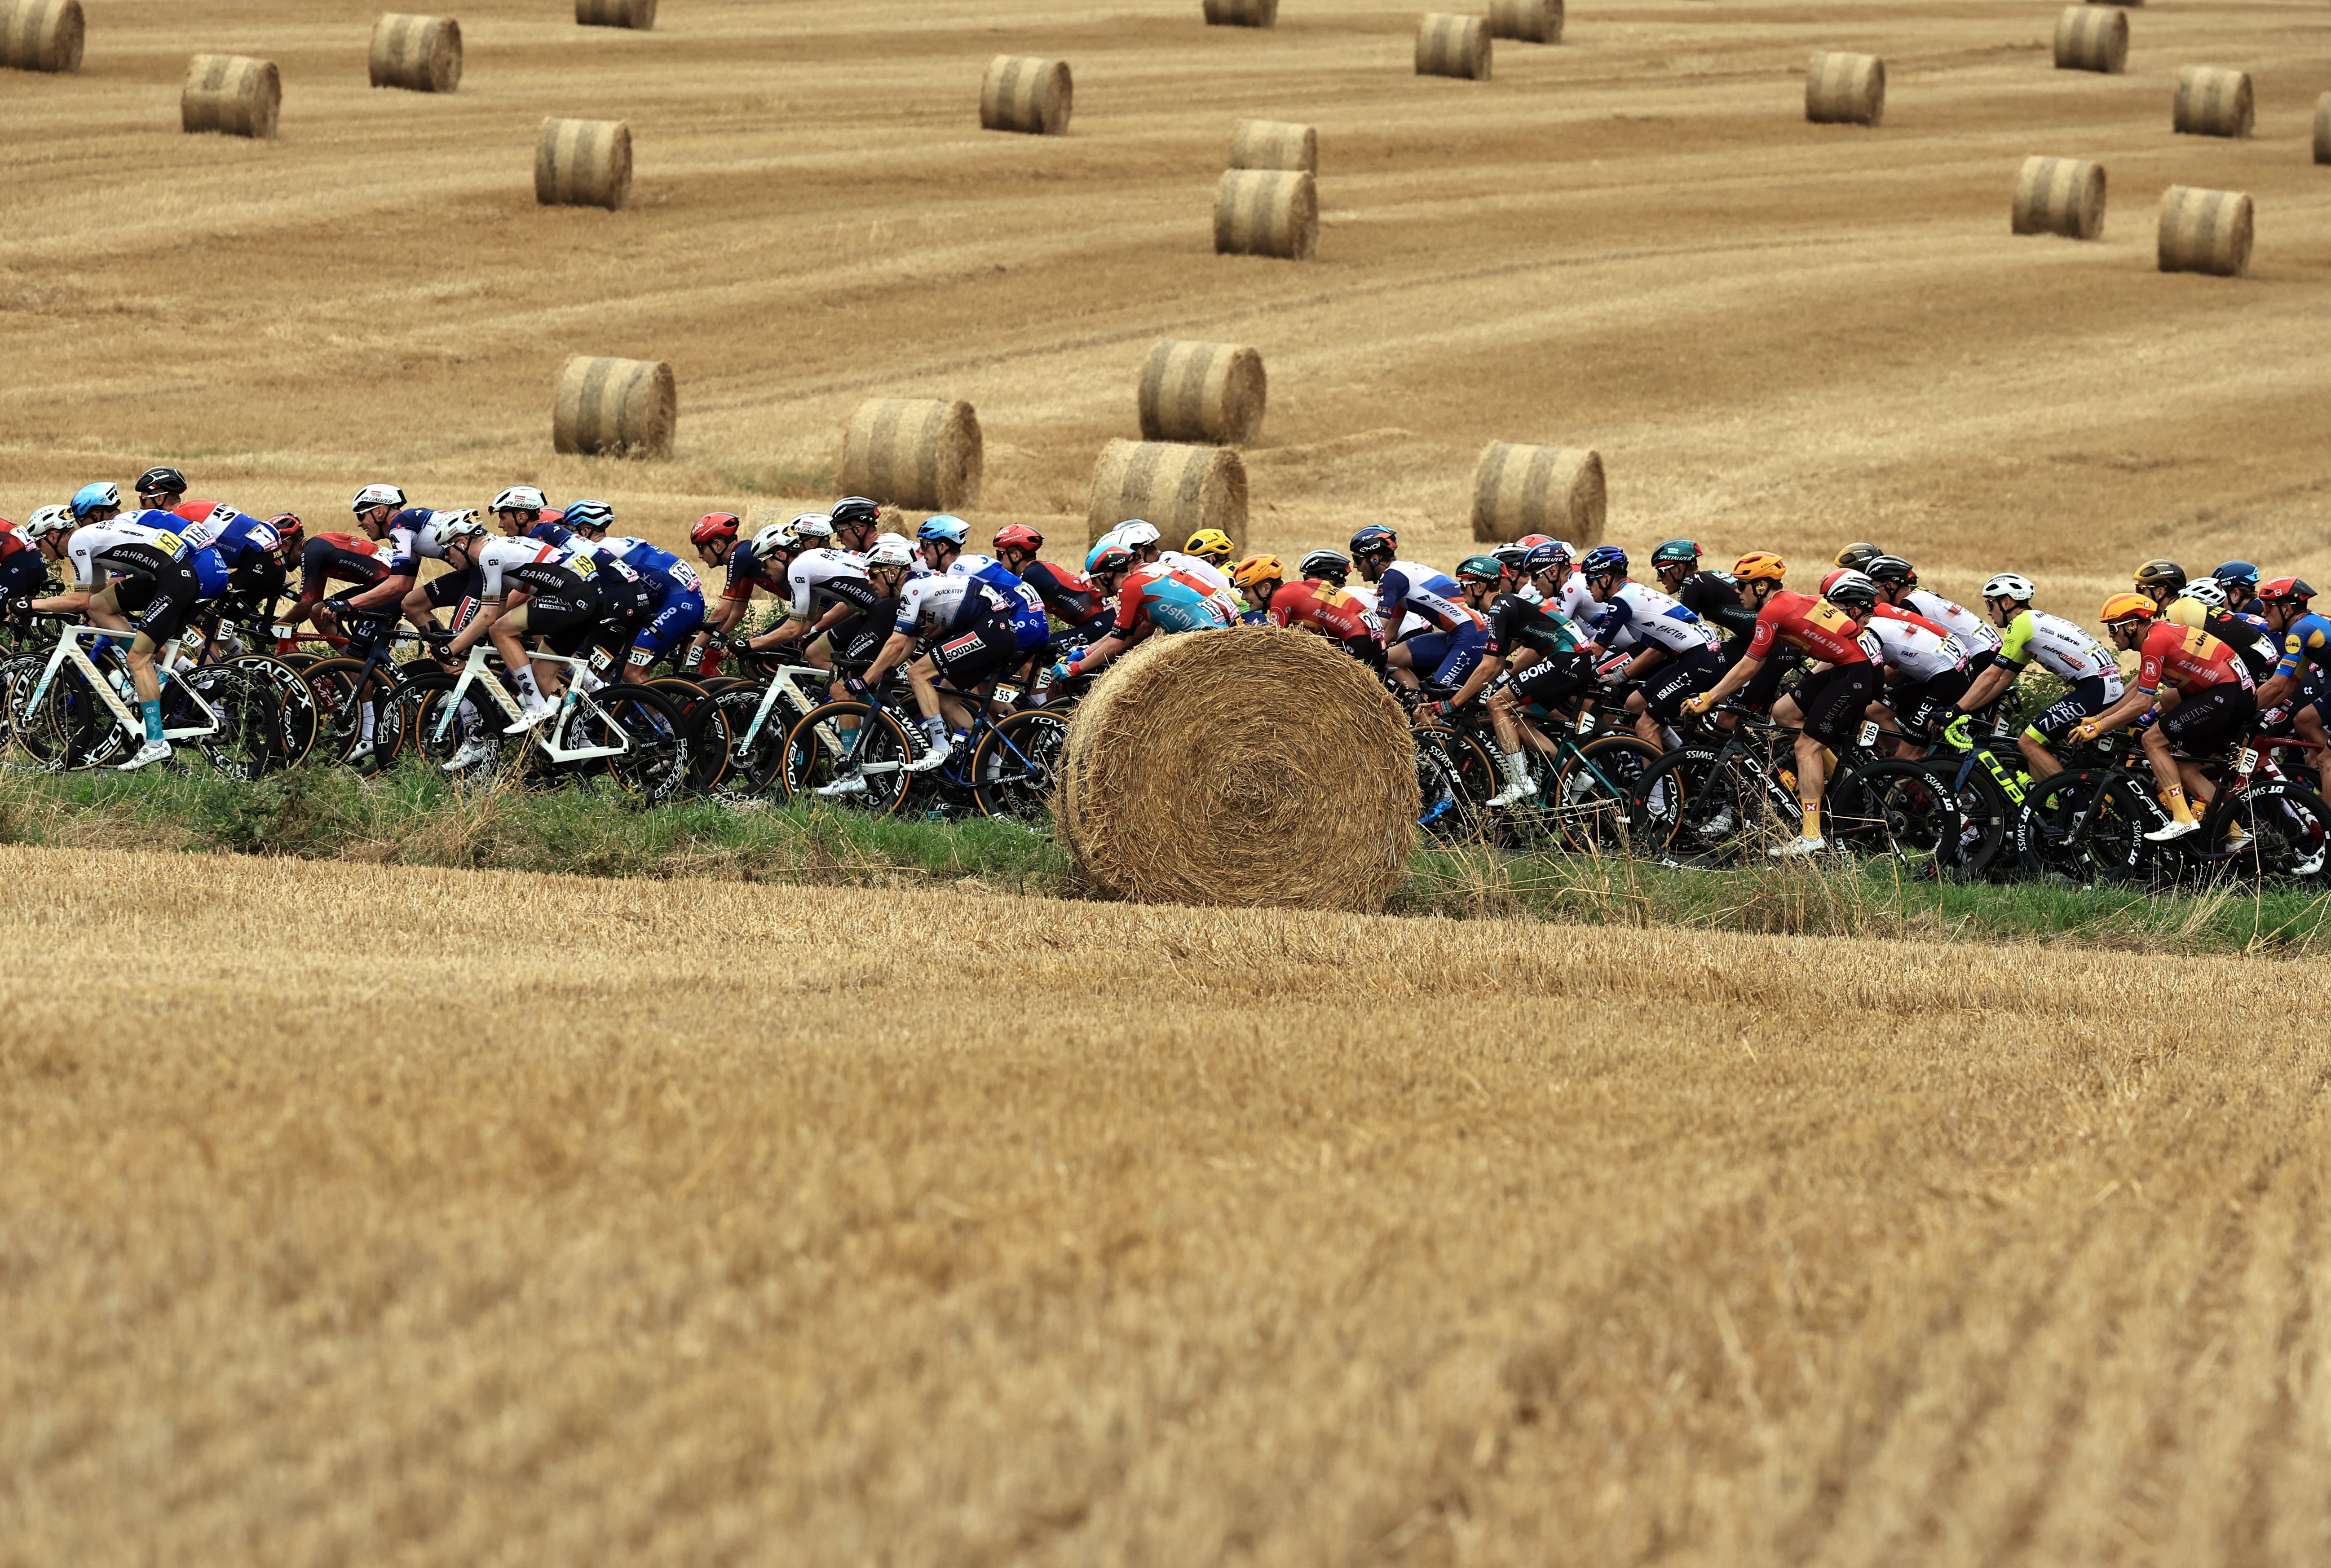 The Tour de France is held annually over three weeks